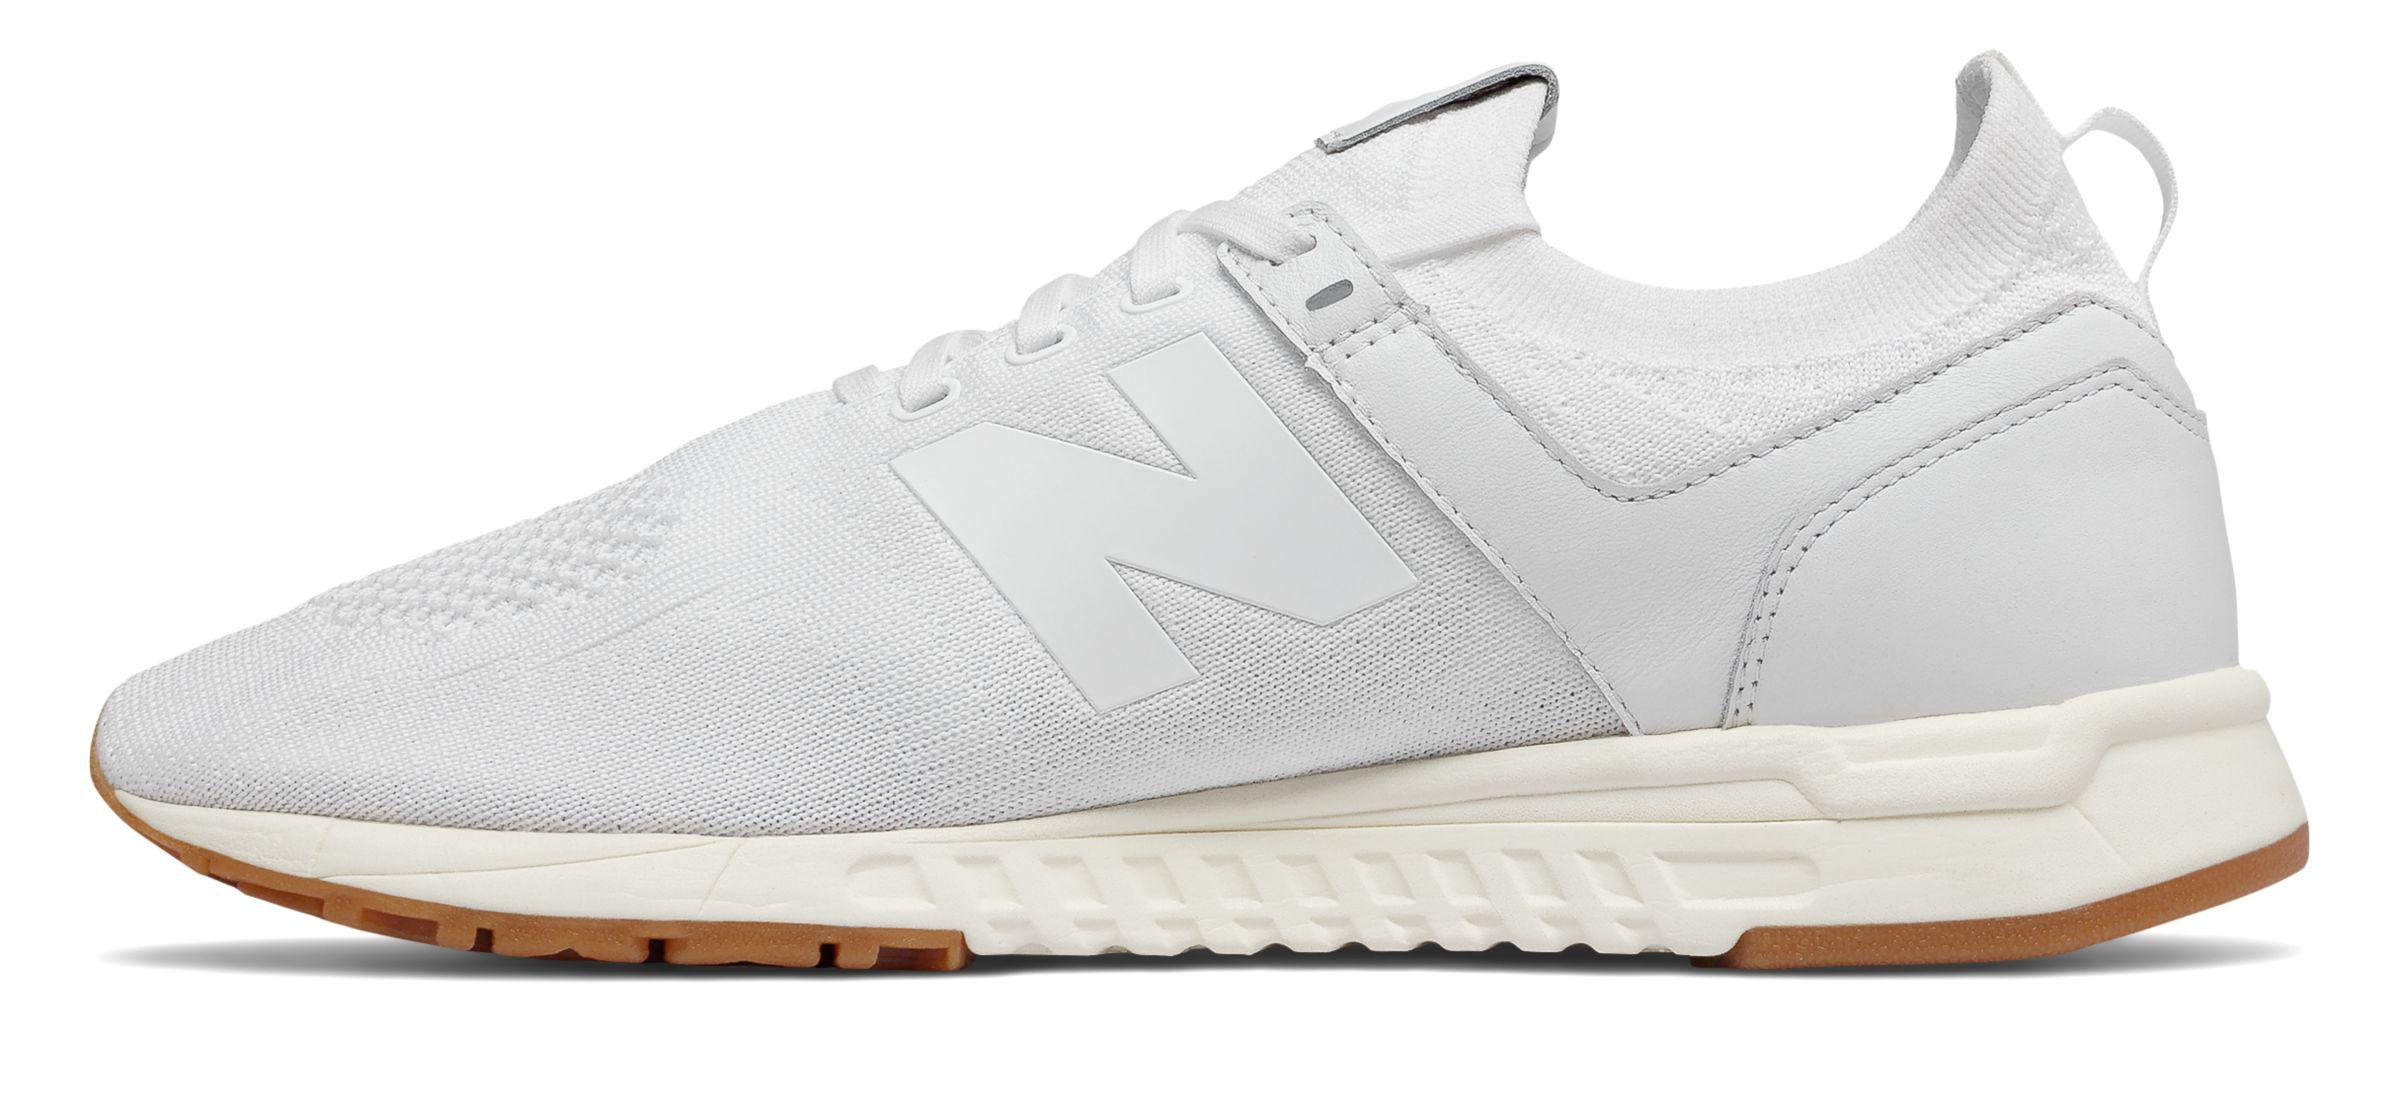 New Balance Synthetic 247 Decon in White for Men - Lyst